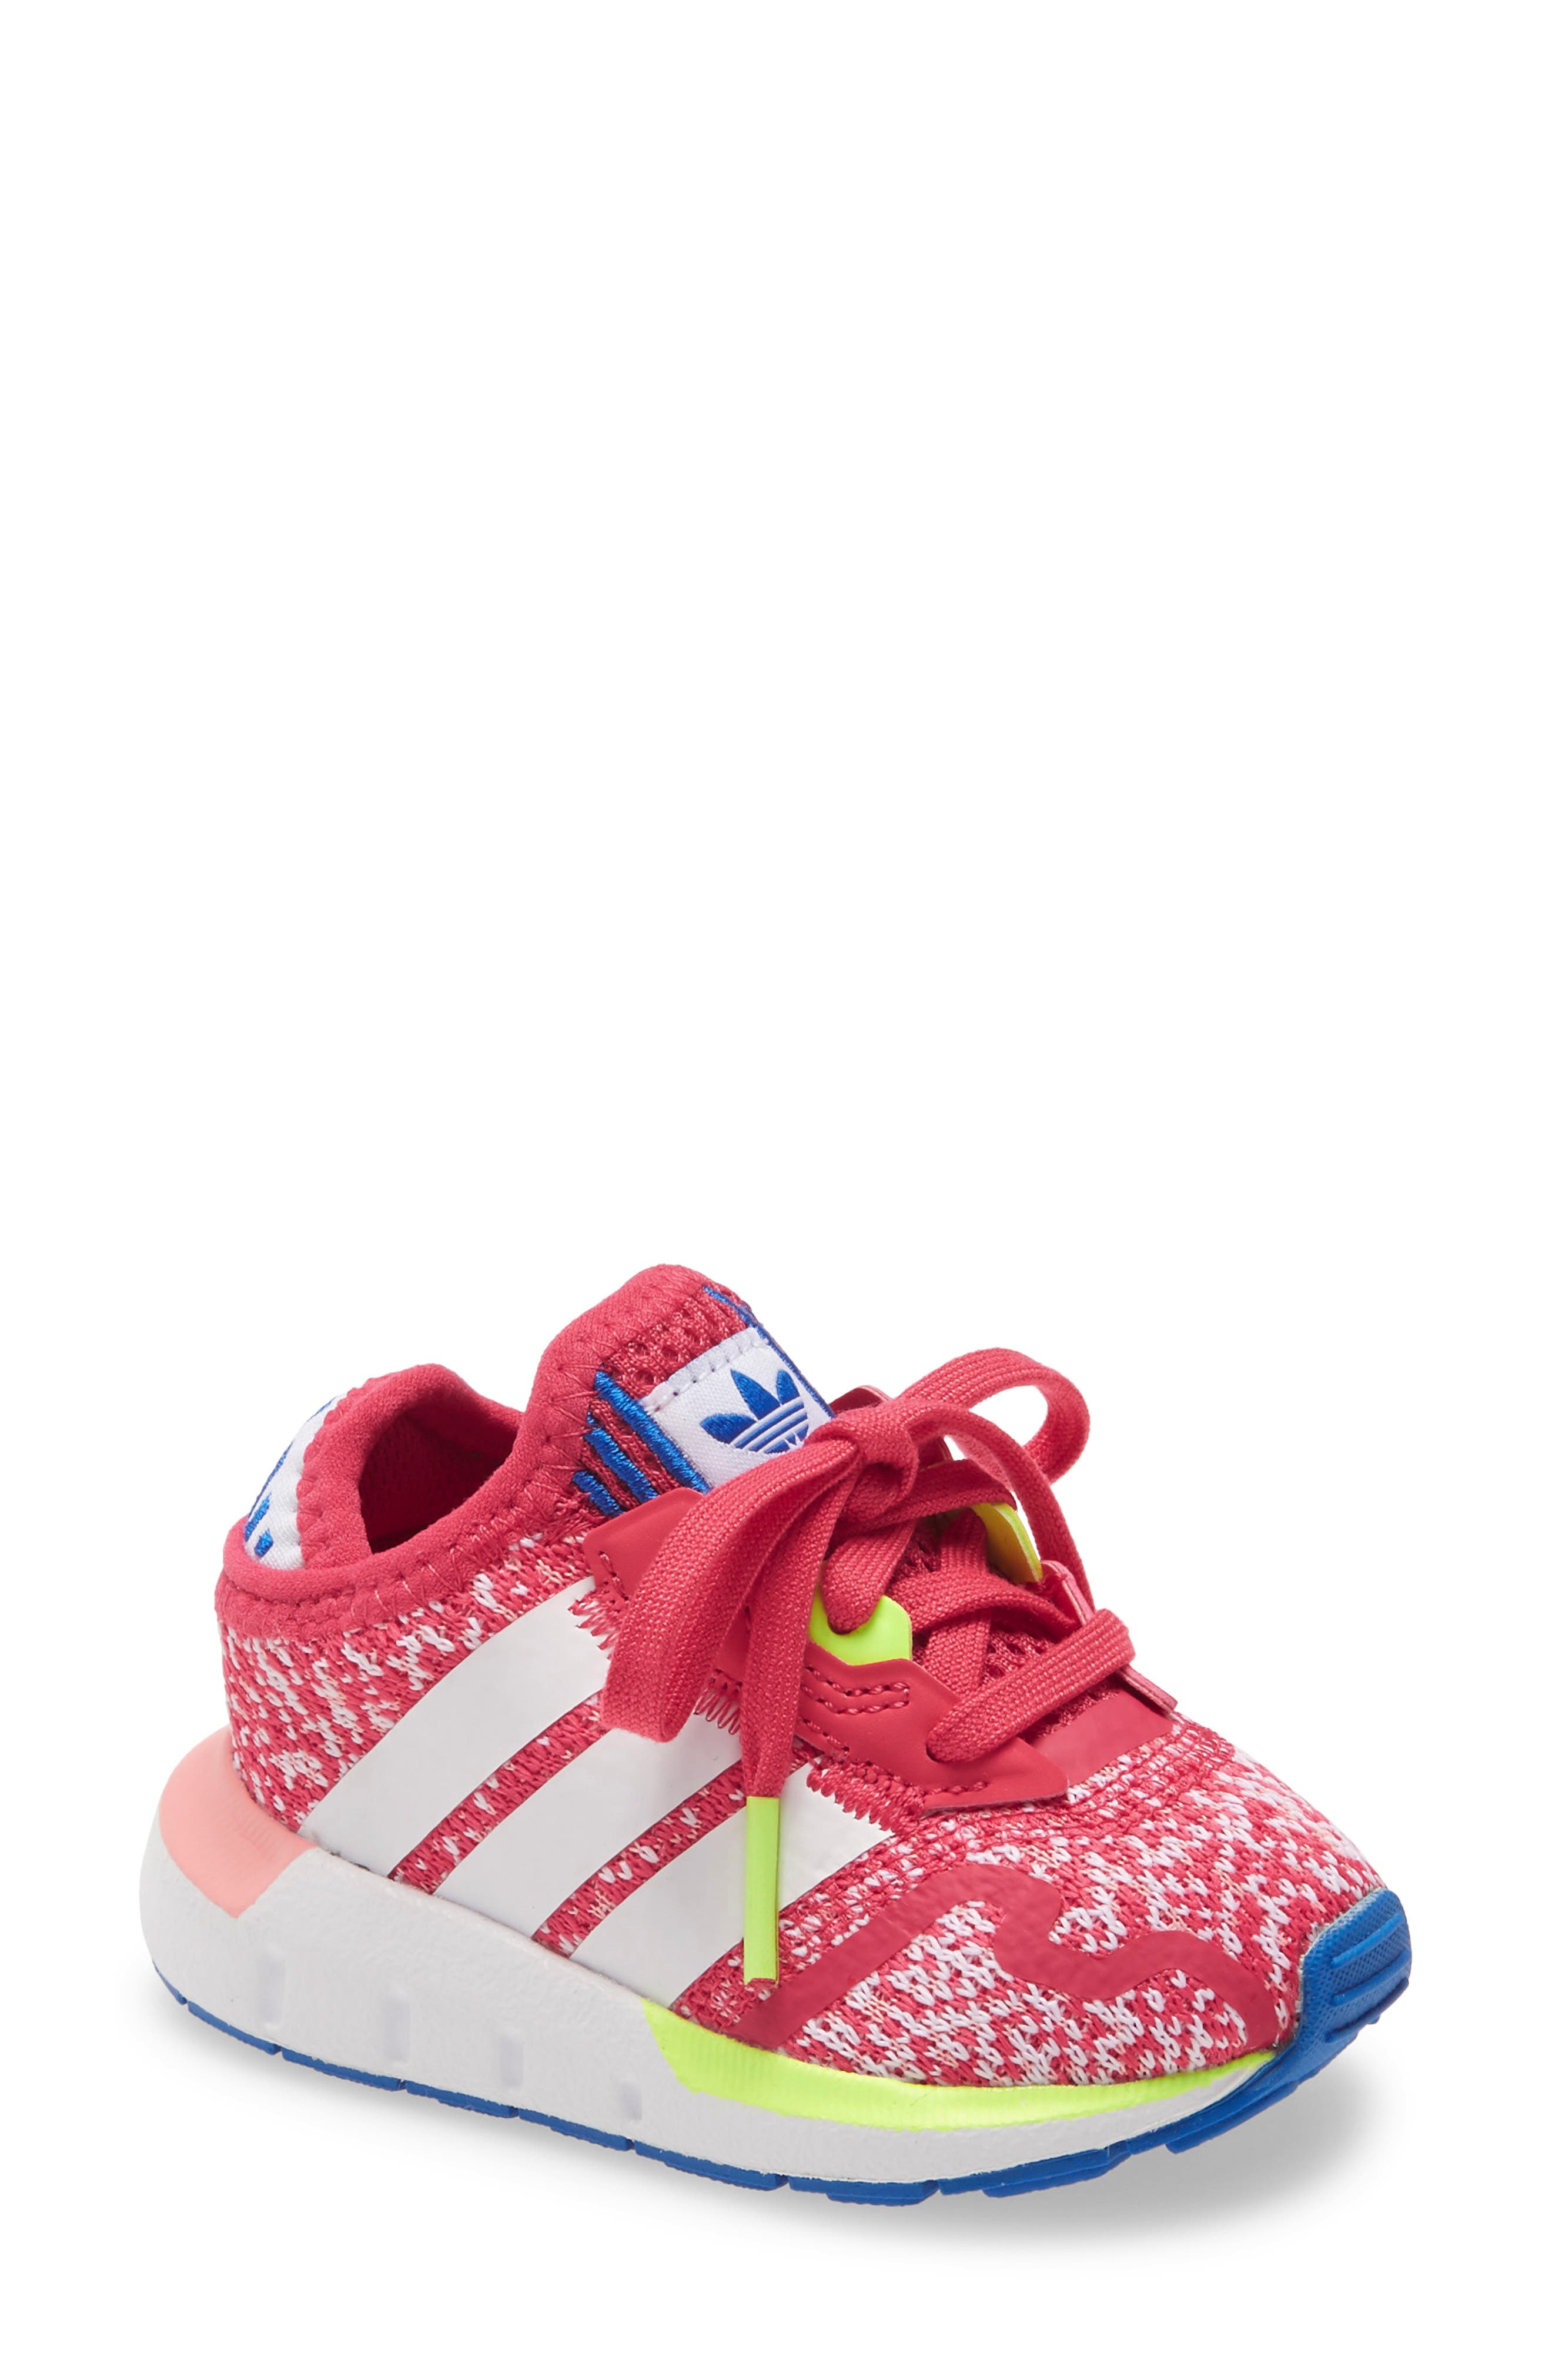 size 8 adidas toddler shoes